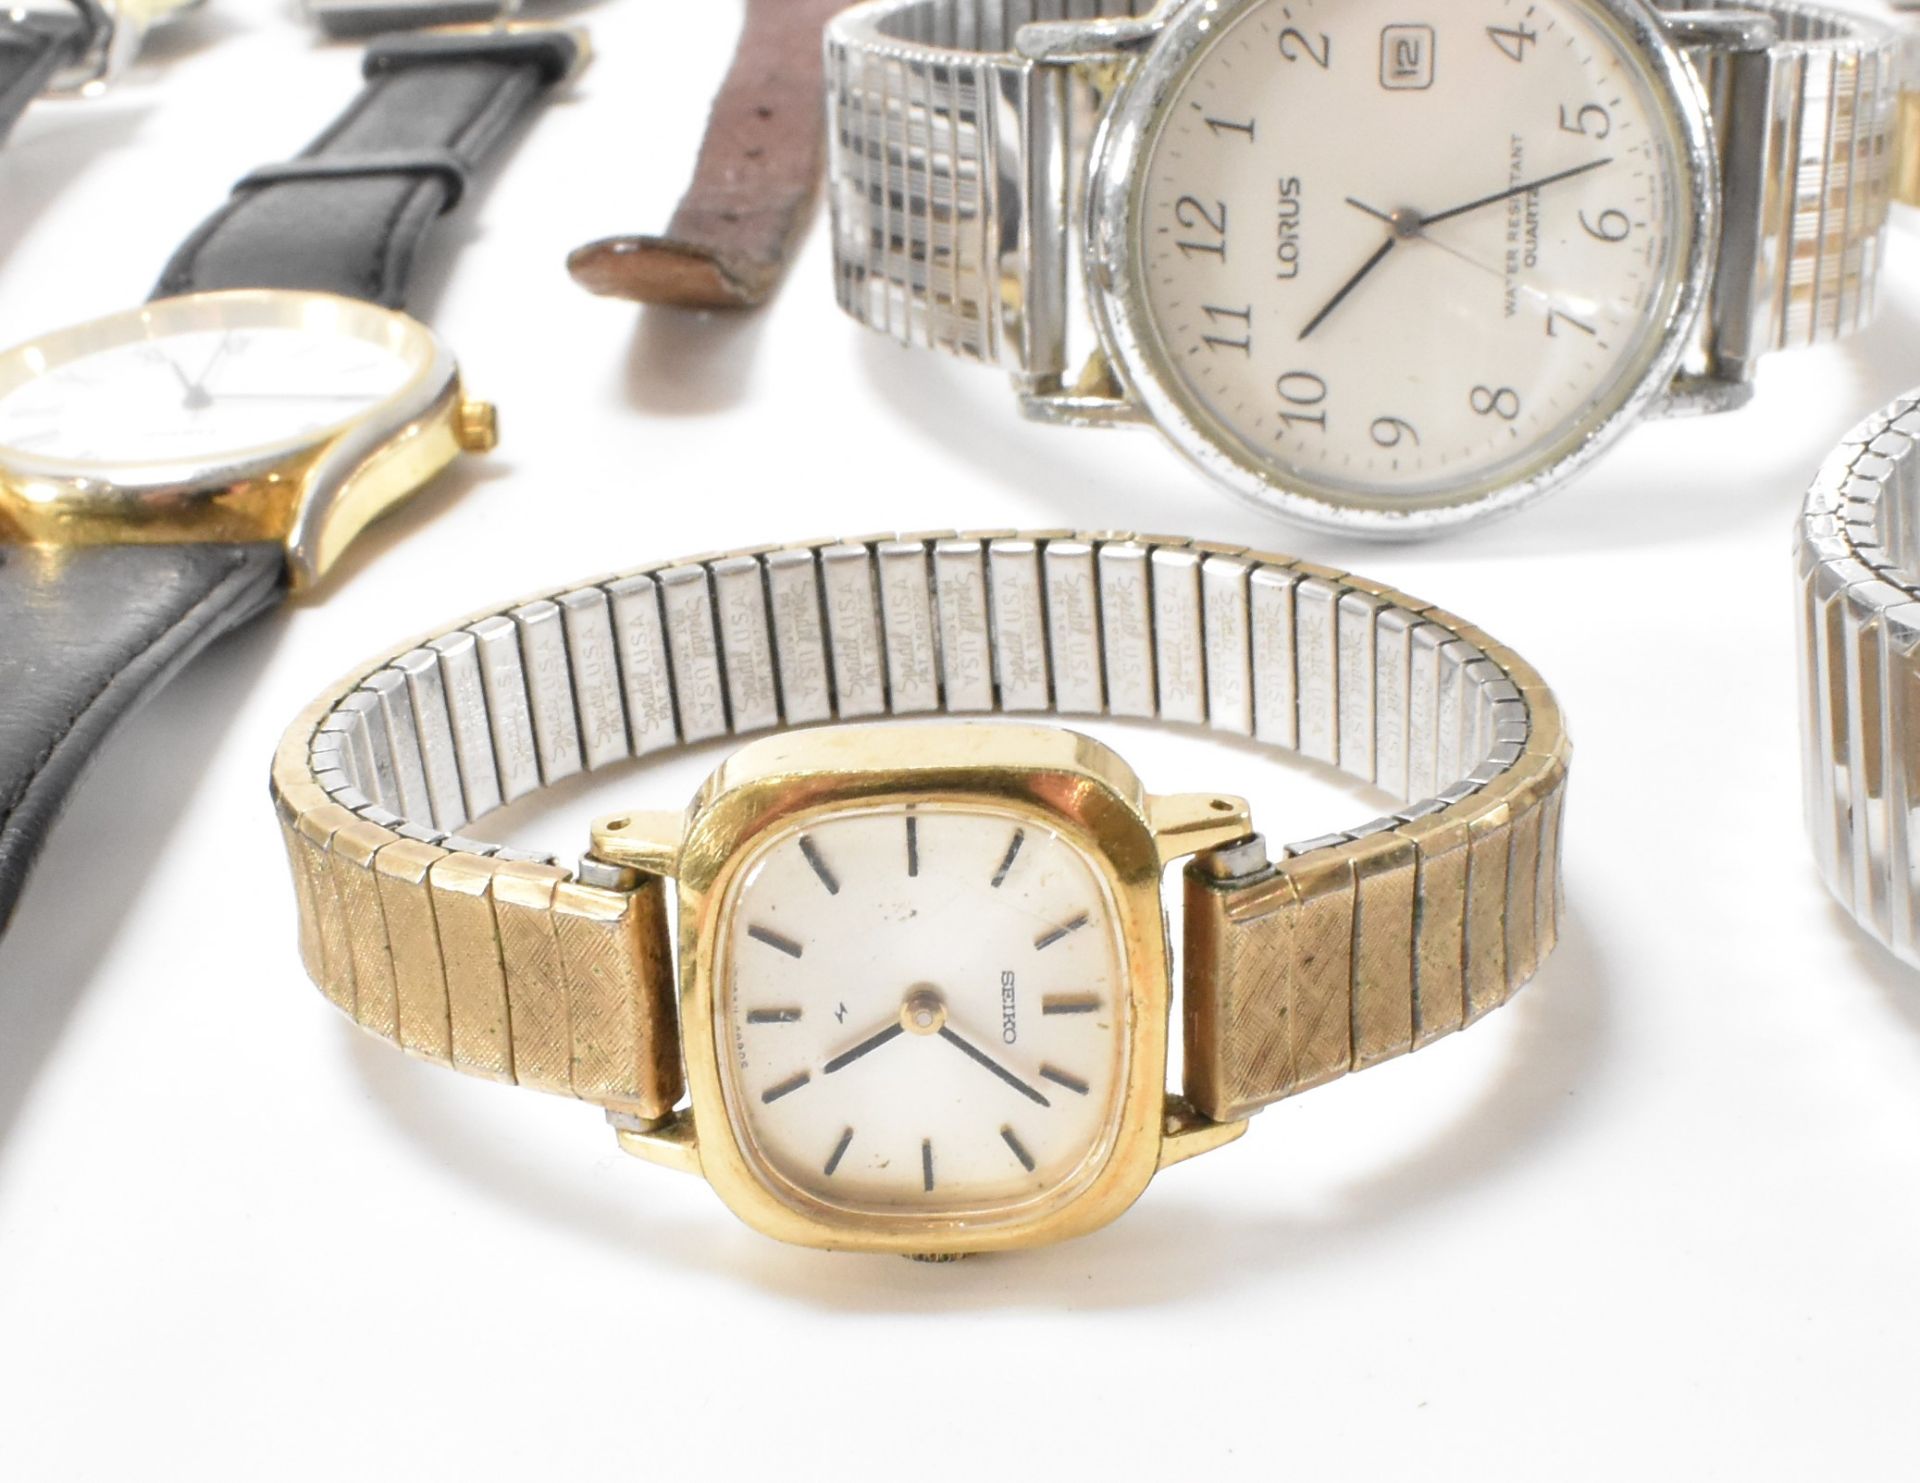 ASSORTMENT OF VARIOUS WRIST WATCHES - Image 5 of 9